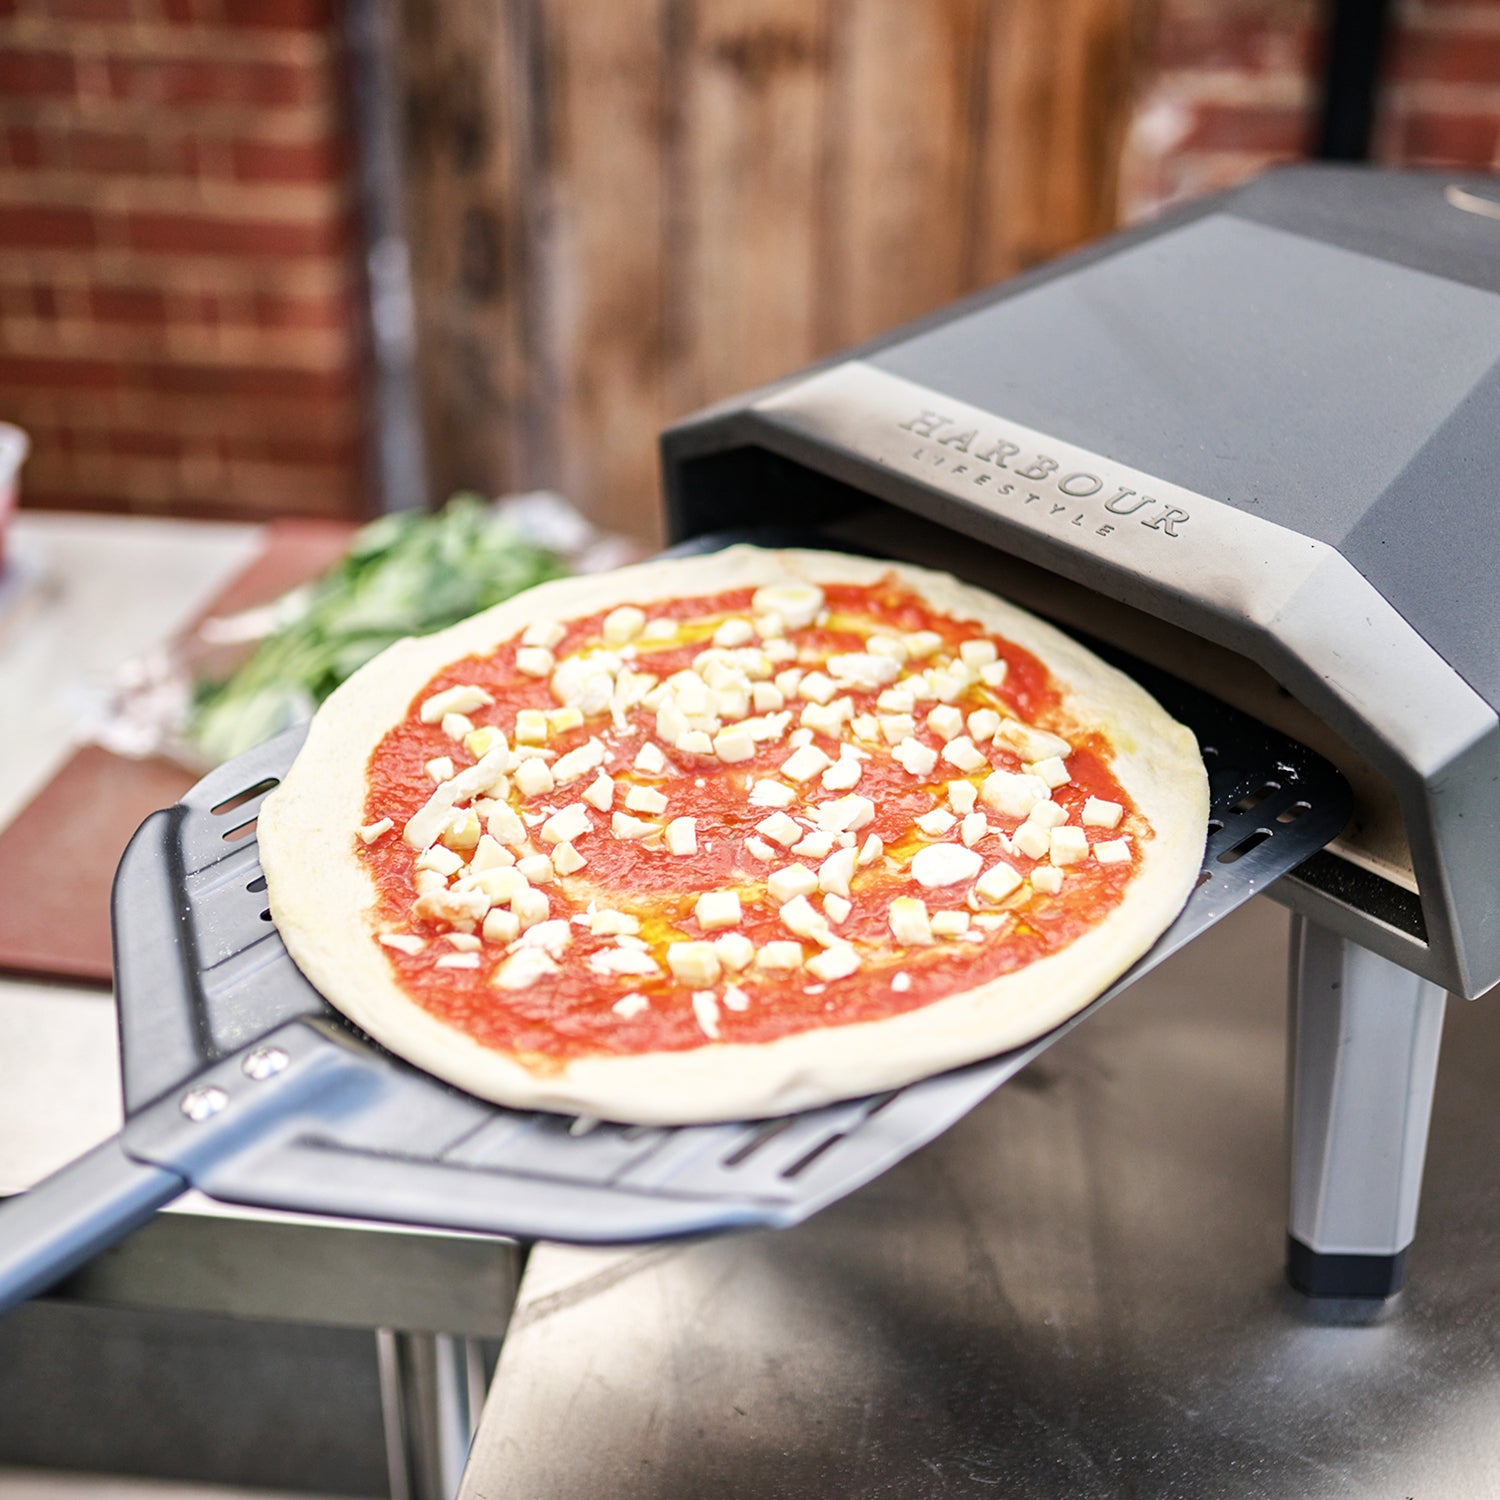 Juno 12" Pizza Oven Bundle with Gas Burner, Stainless Steel Pizza Peel and Cover